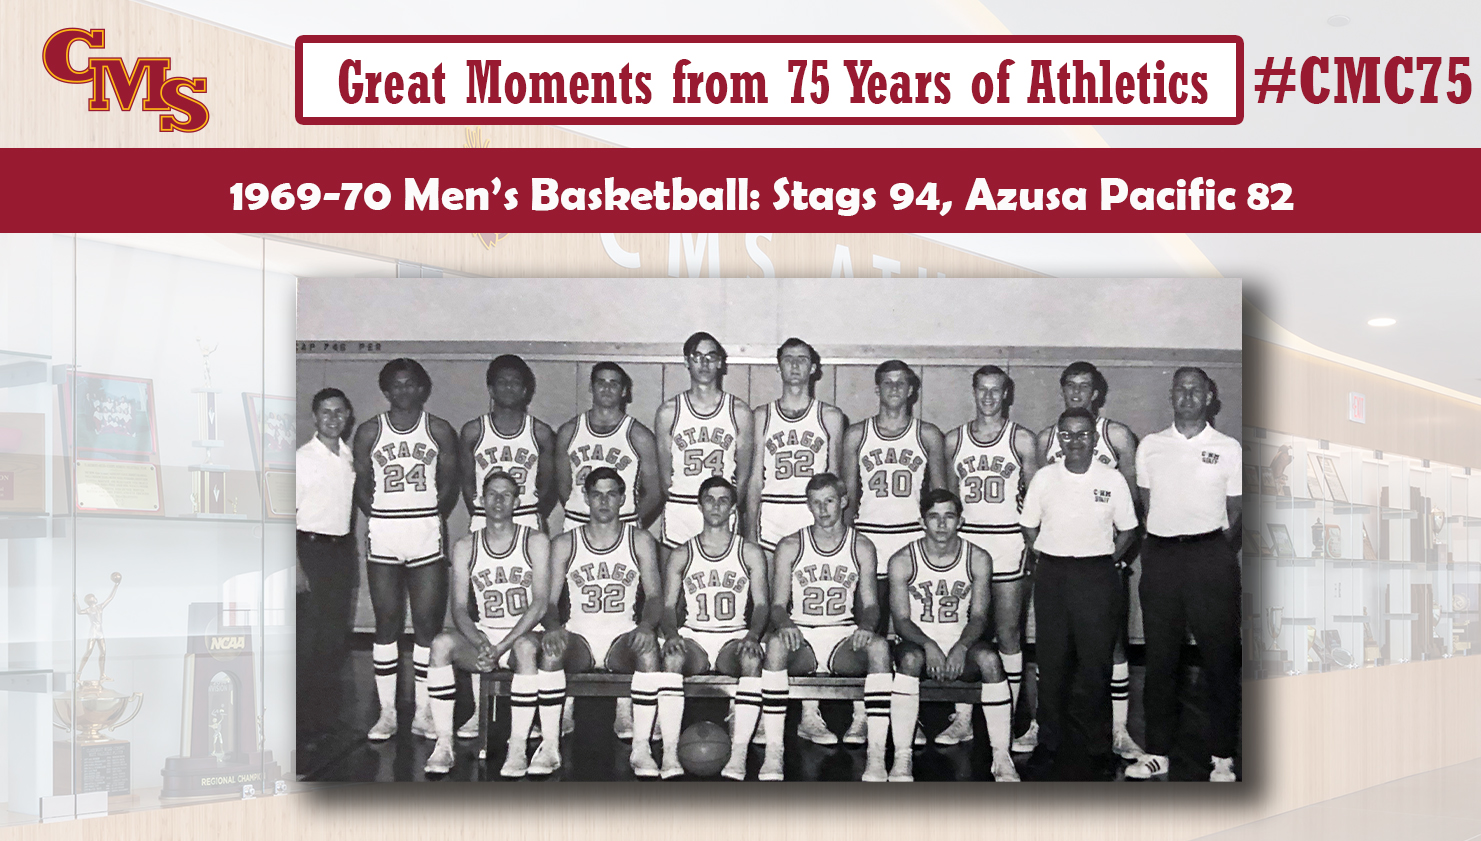  Team photo of the 1969-70 Men's Basketball Team. Words over the photo read: Great Moments from 75 Years of Athletics, 1969-70 Men's Basketball: Stags 94, Azusa Pacific 82